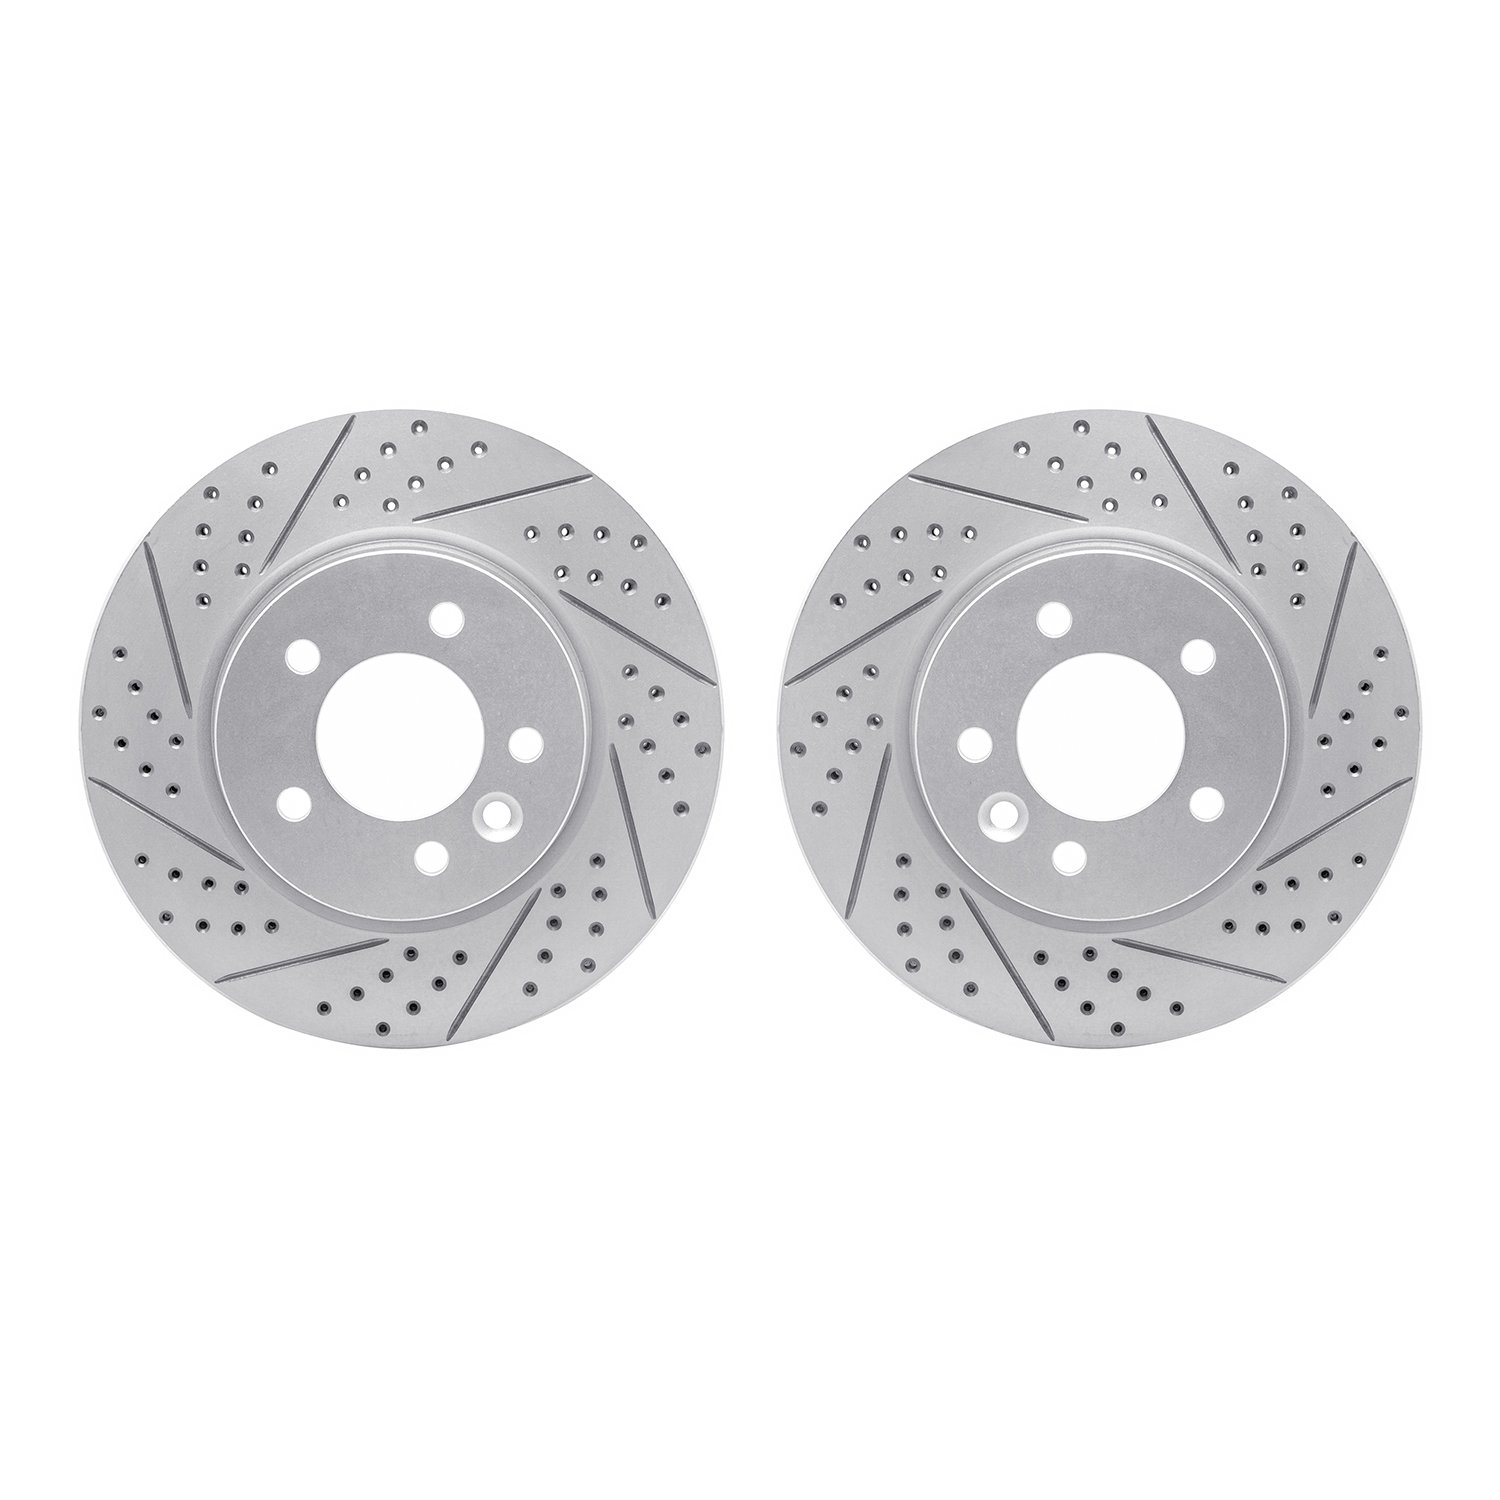 2002-11007 Geoperformance Drilled/Slotted Brake Rotors, 2005-2007 Land Rover, Position: Front